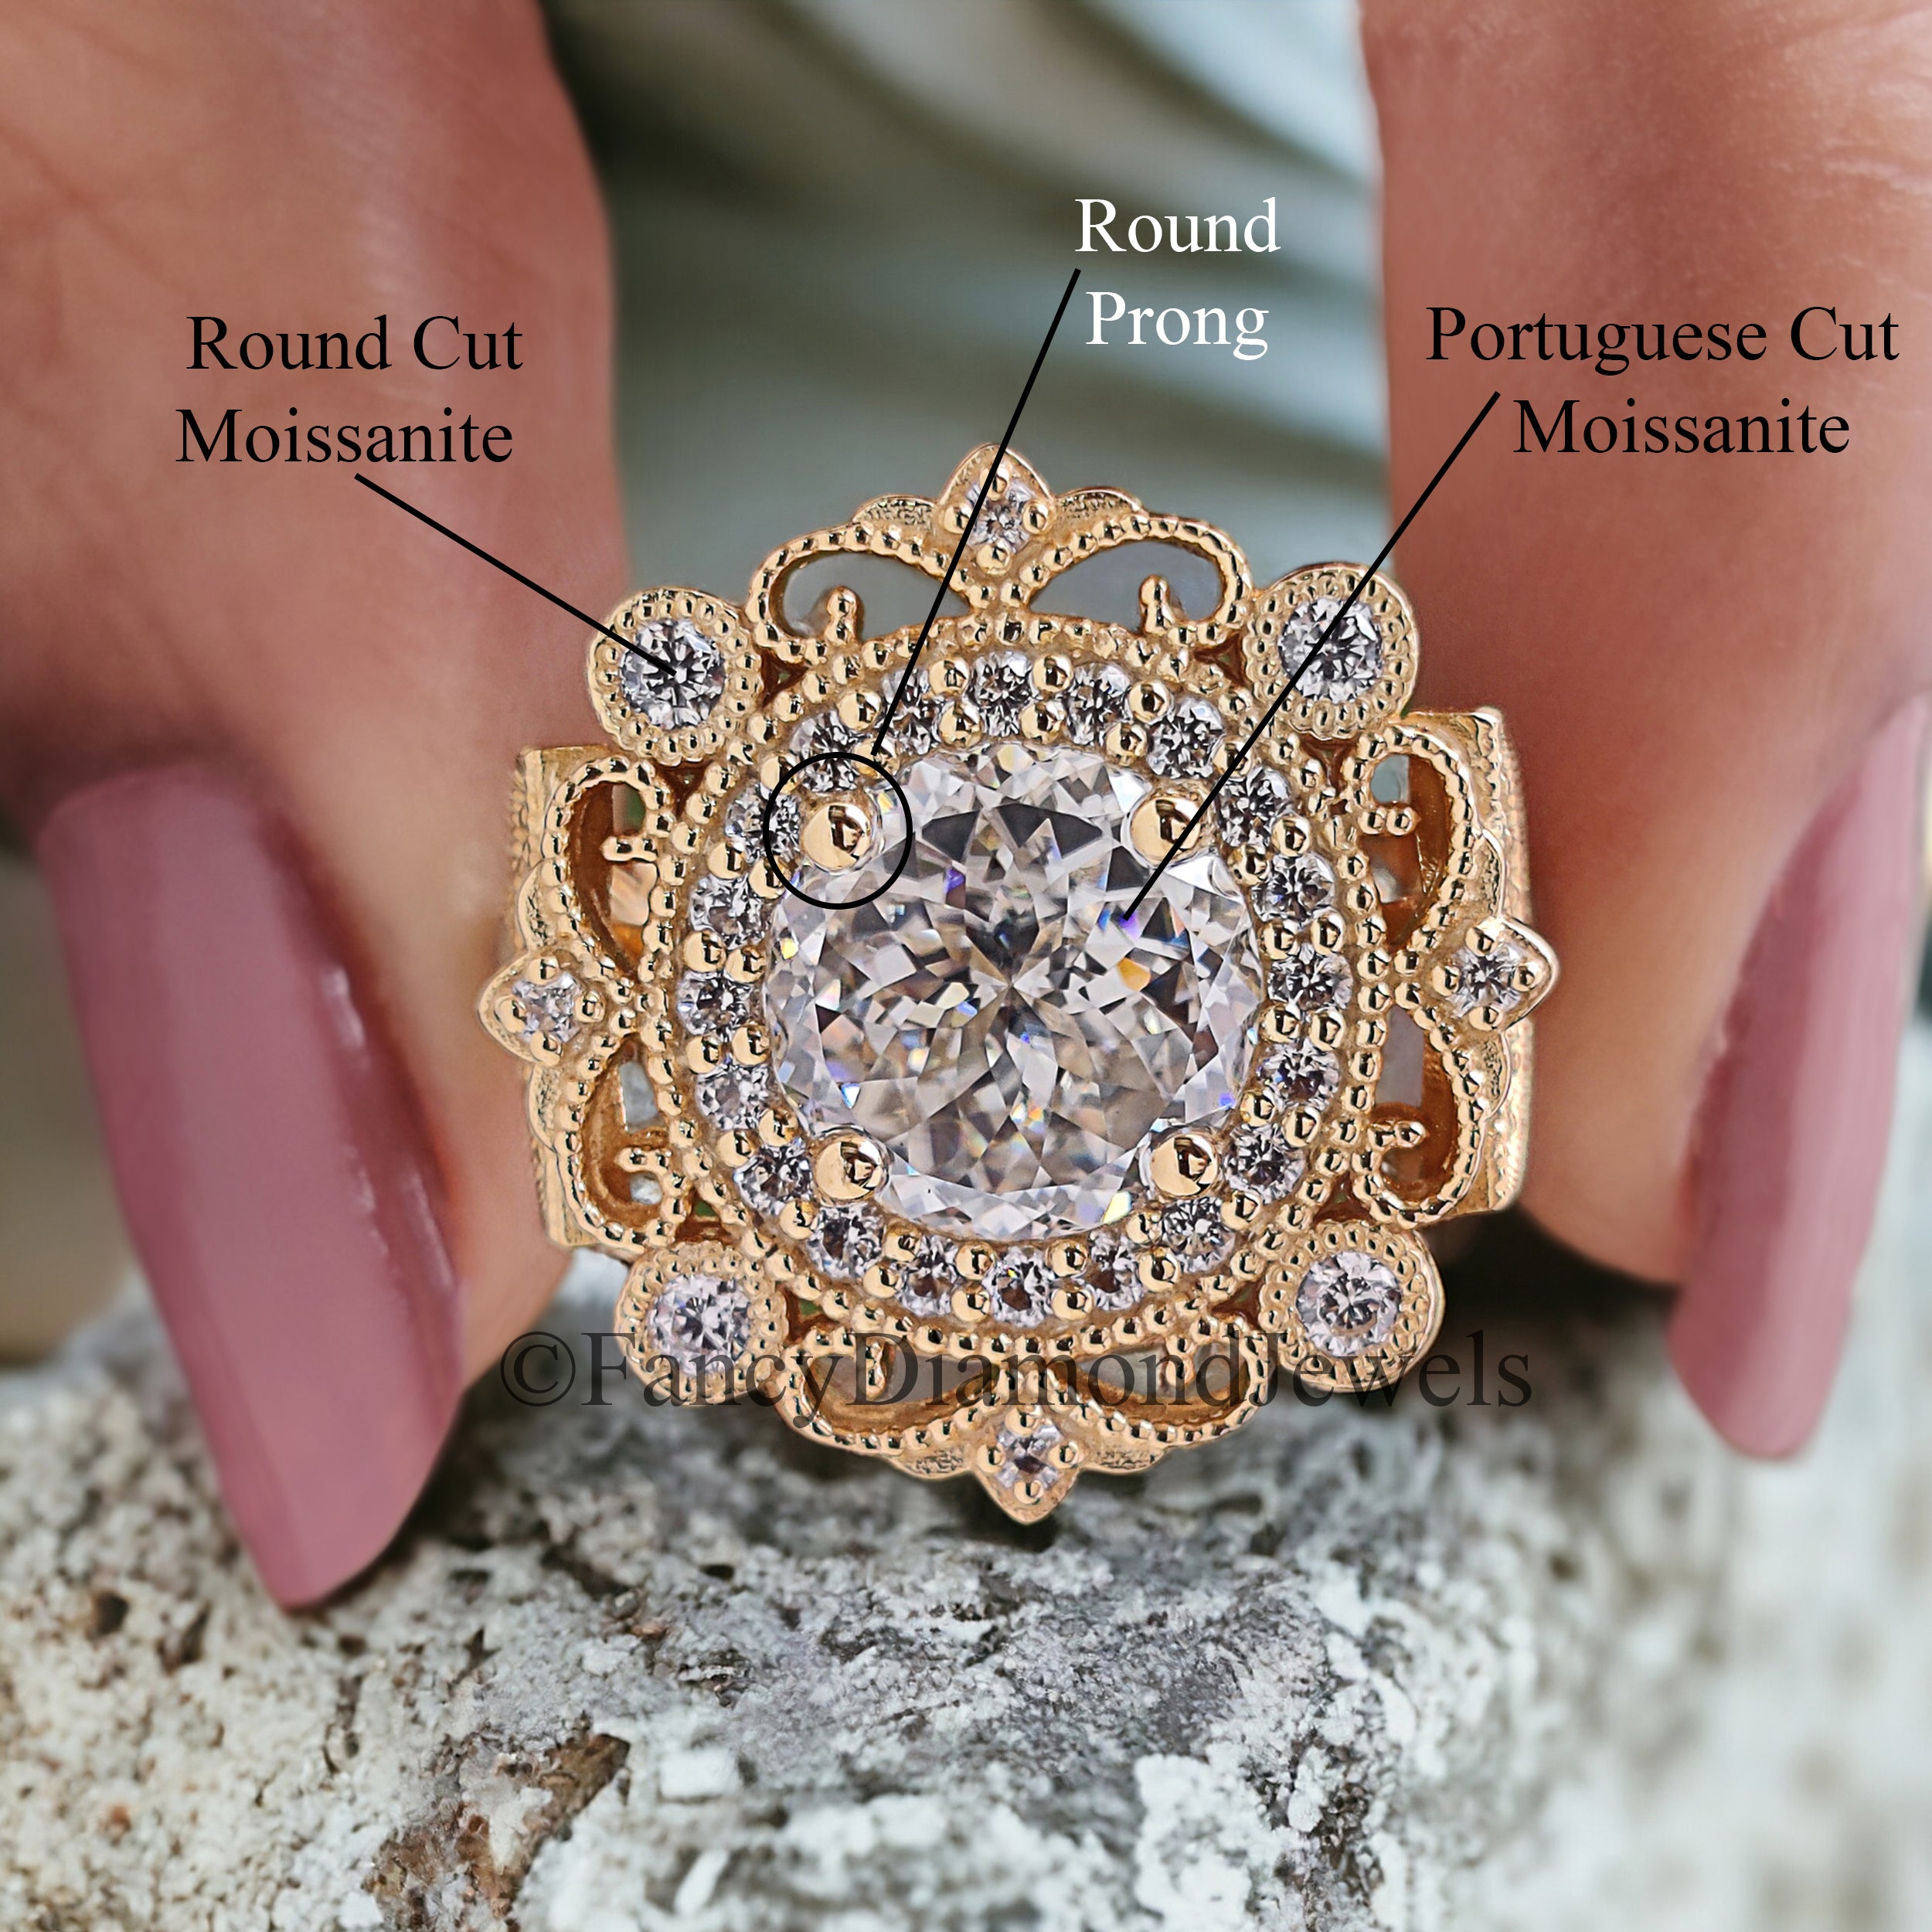 Vintage Filigree Engagement Ring Handmade Portuguese Cut Moissanite With Halo Design Perfect For Luxury Wedding Anniversary Gifts FD218